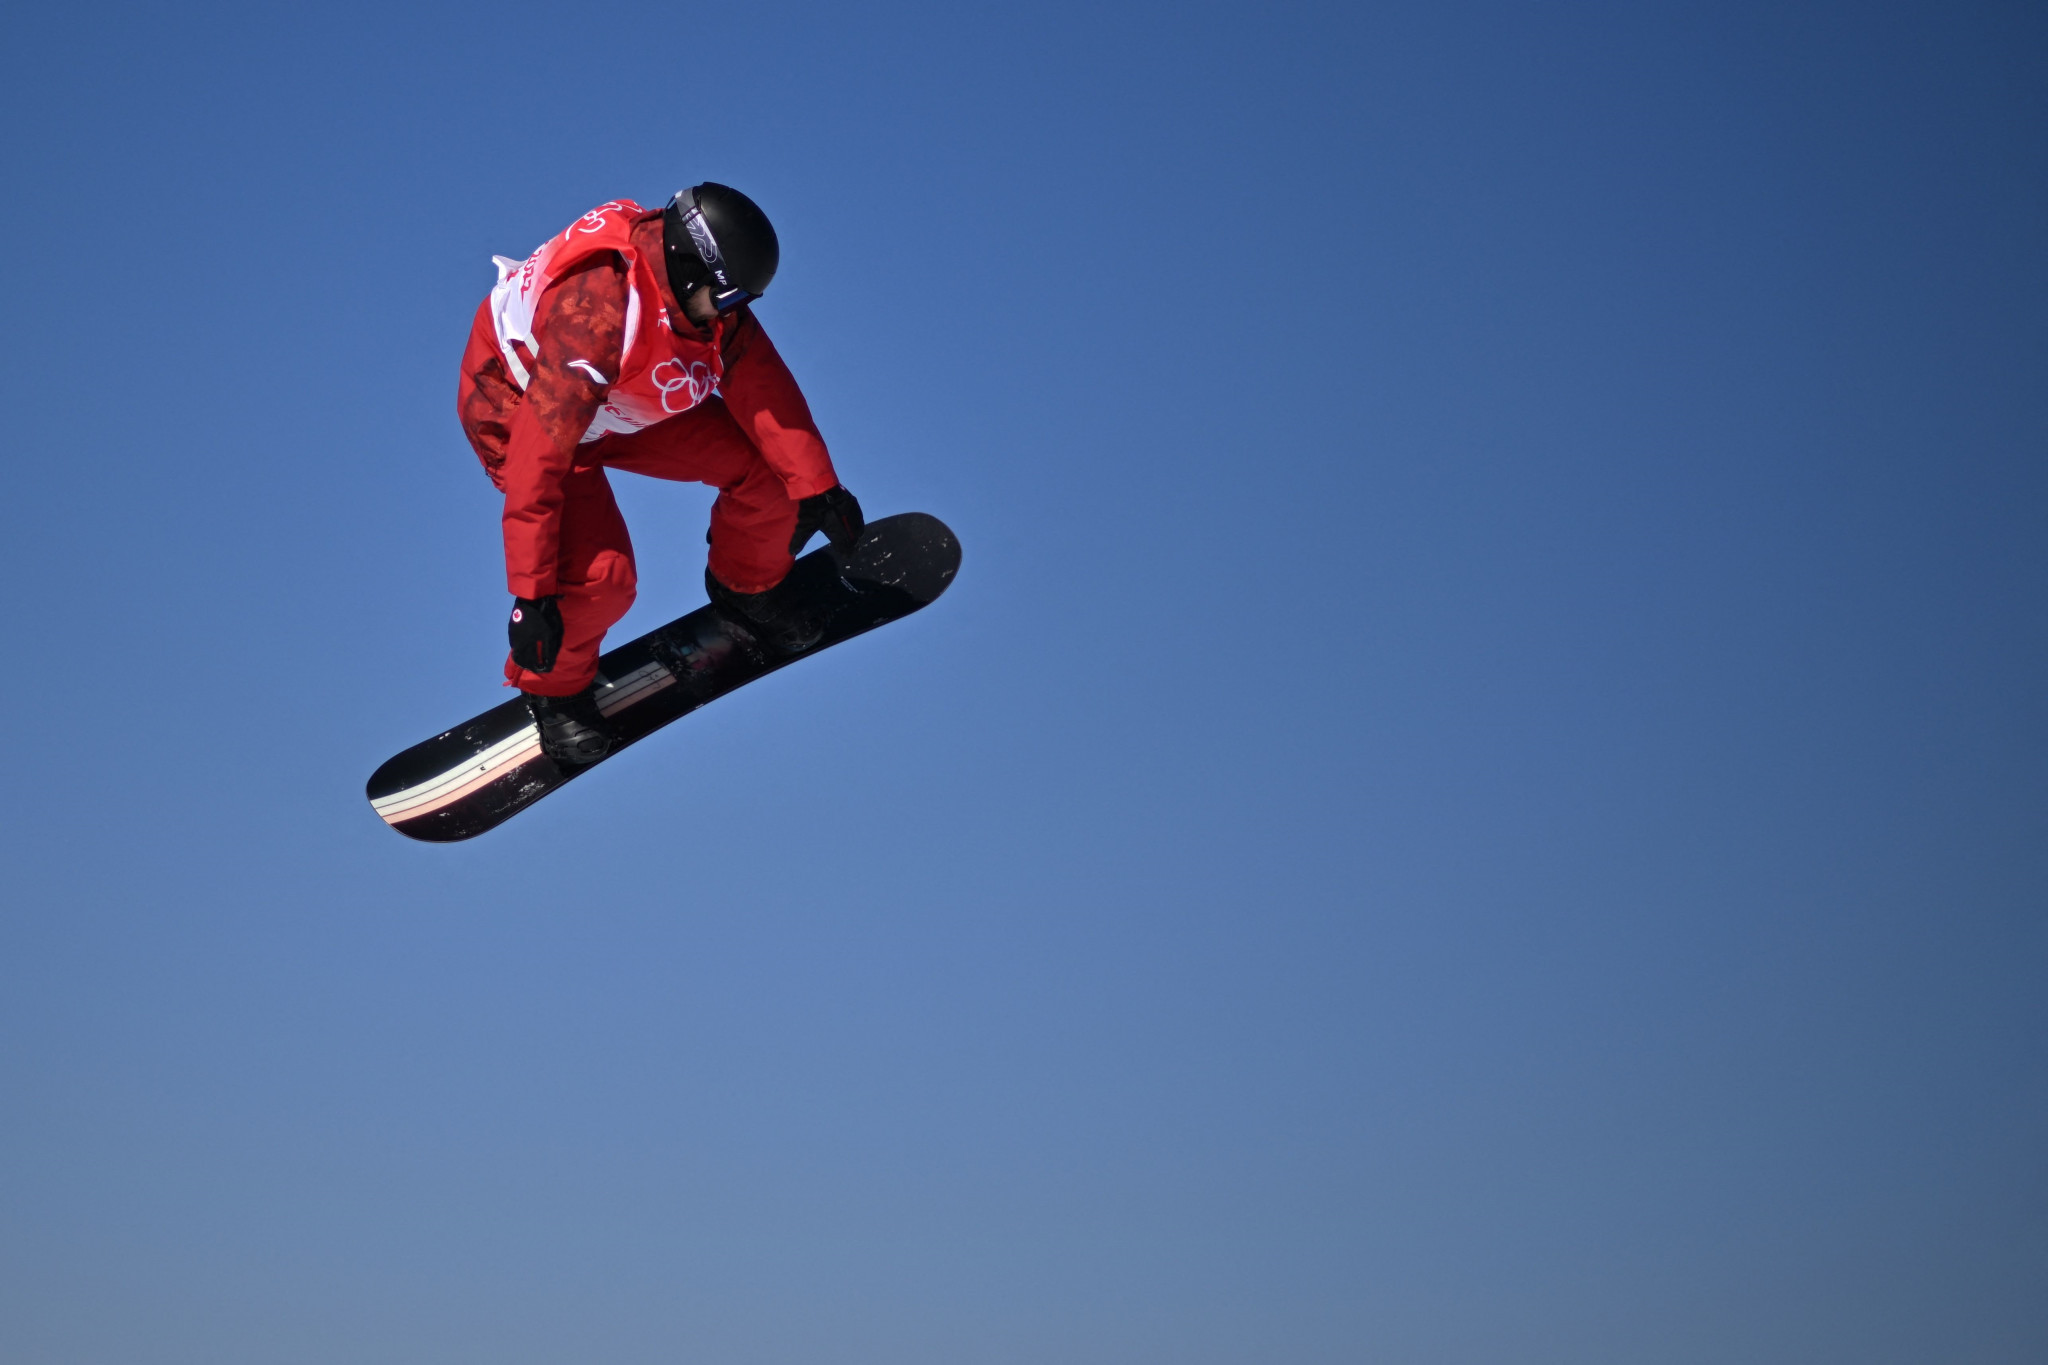 New video angles show that Canadian Olympic gold medallist Max Parrot does not grab his snowboard in his final run at Beijing 2022 last week ©Getty Images